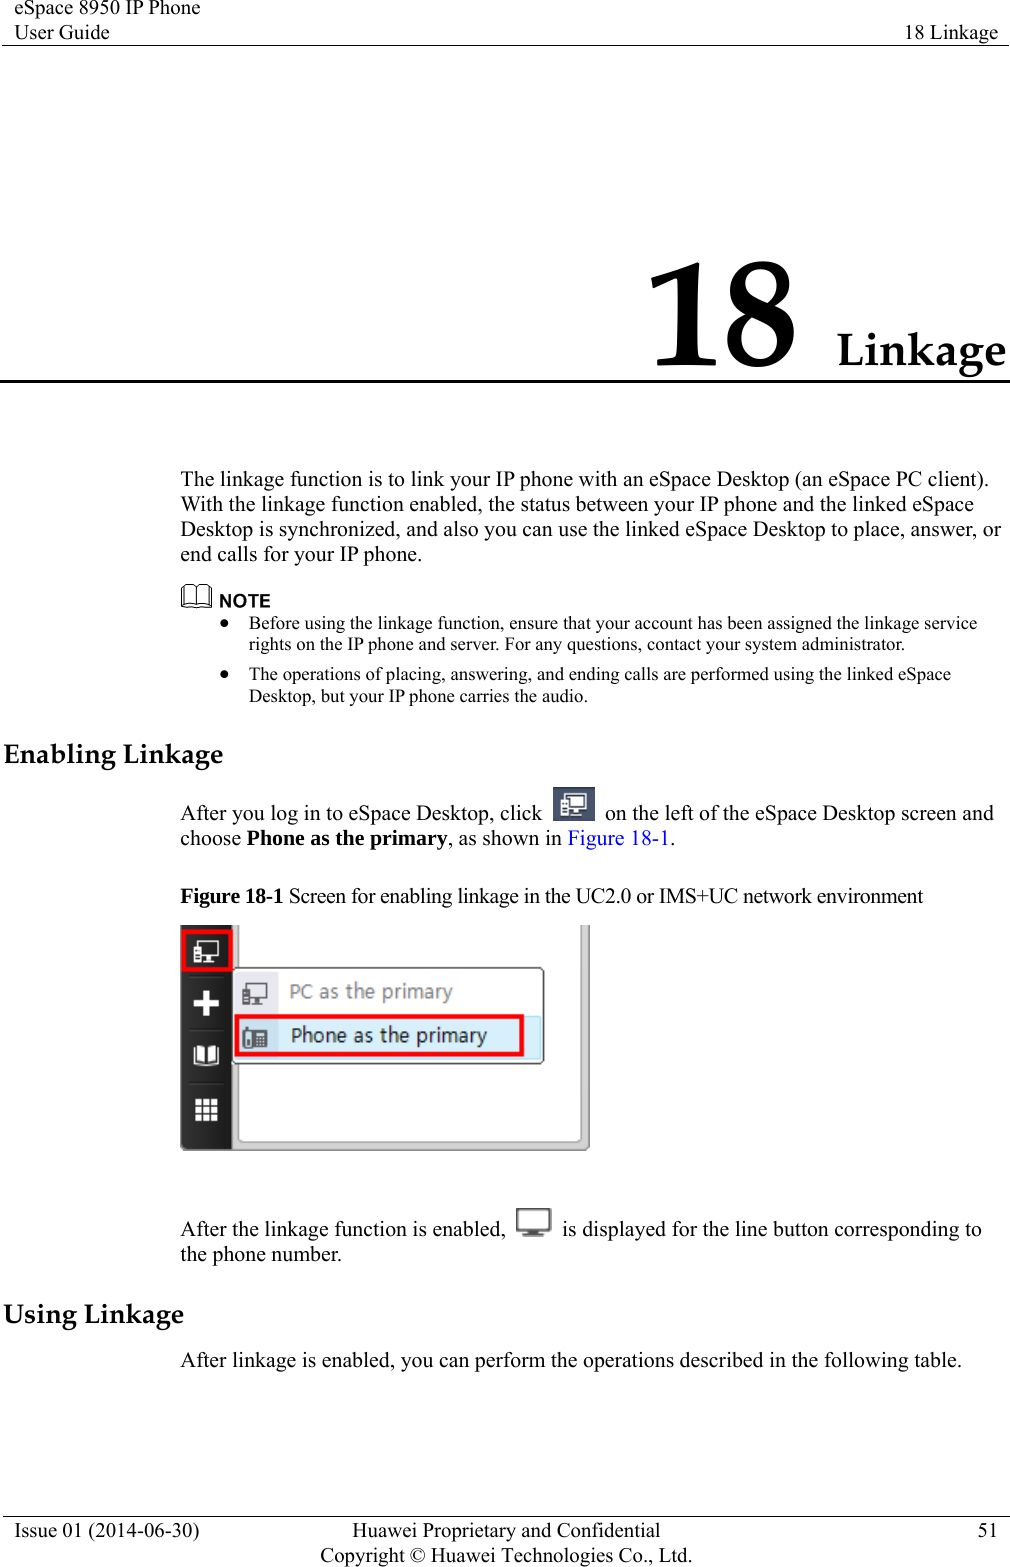 eSpace 8950 IP Phone User Guide  18 Linkage Issue 01 (2014-06-30)  Huawei Proprietary and Confidential         Copyright © Huawei Technologies Co., Ltd.51 18 Linkage The linkage function is to link your IP phone with an eSpace Desktop (an eSpace PC client). With the linkage function enabled, the status between your IP phone and the linked eSpace Desktop is synchronized, and also you can use the linked eSpace Desktop to place, answer, or end calls for your IP phone.   Before using the linkage function, ensure that your account has been assigned the linkage service rights on the IP phone and server. For any questions, contact your system administrator.  The operations of placing, answering, and ending calls are performed using the linked eSpace Desktop, but your IP phone carries the audio. Enabling Linkage After you log in to eSpace Desktop, click    on the left of the eSpace Desktop screen and choose Phone as the primary, as shown in Figure 18-1. Figure 18-1 Screen for enabling linkage in the UC2.0 or IMS+UC network environment   After the linkage function is enabled,    is displayed for the line button corresponding to the phone number.   Using Linkage After linkage is enabled, you can perform the operations described in the following table. 